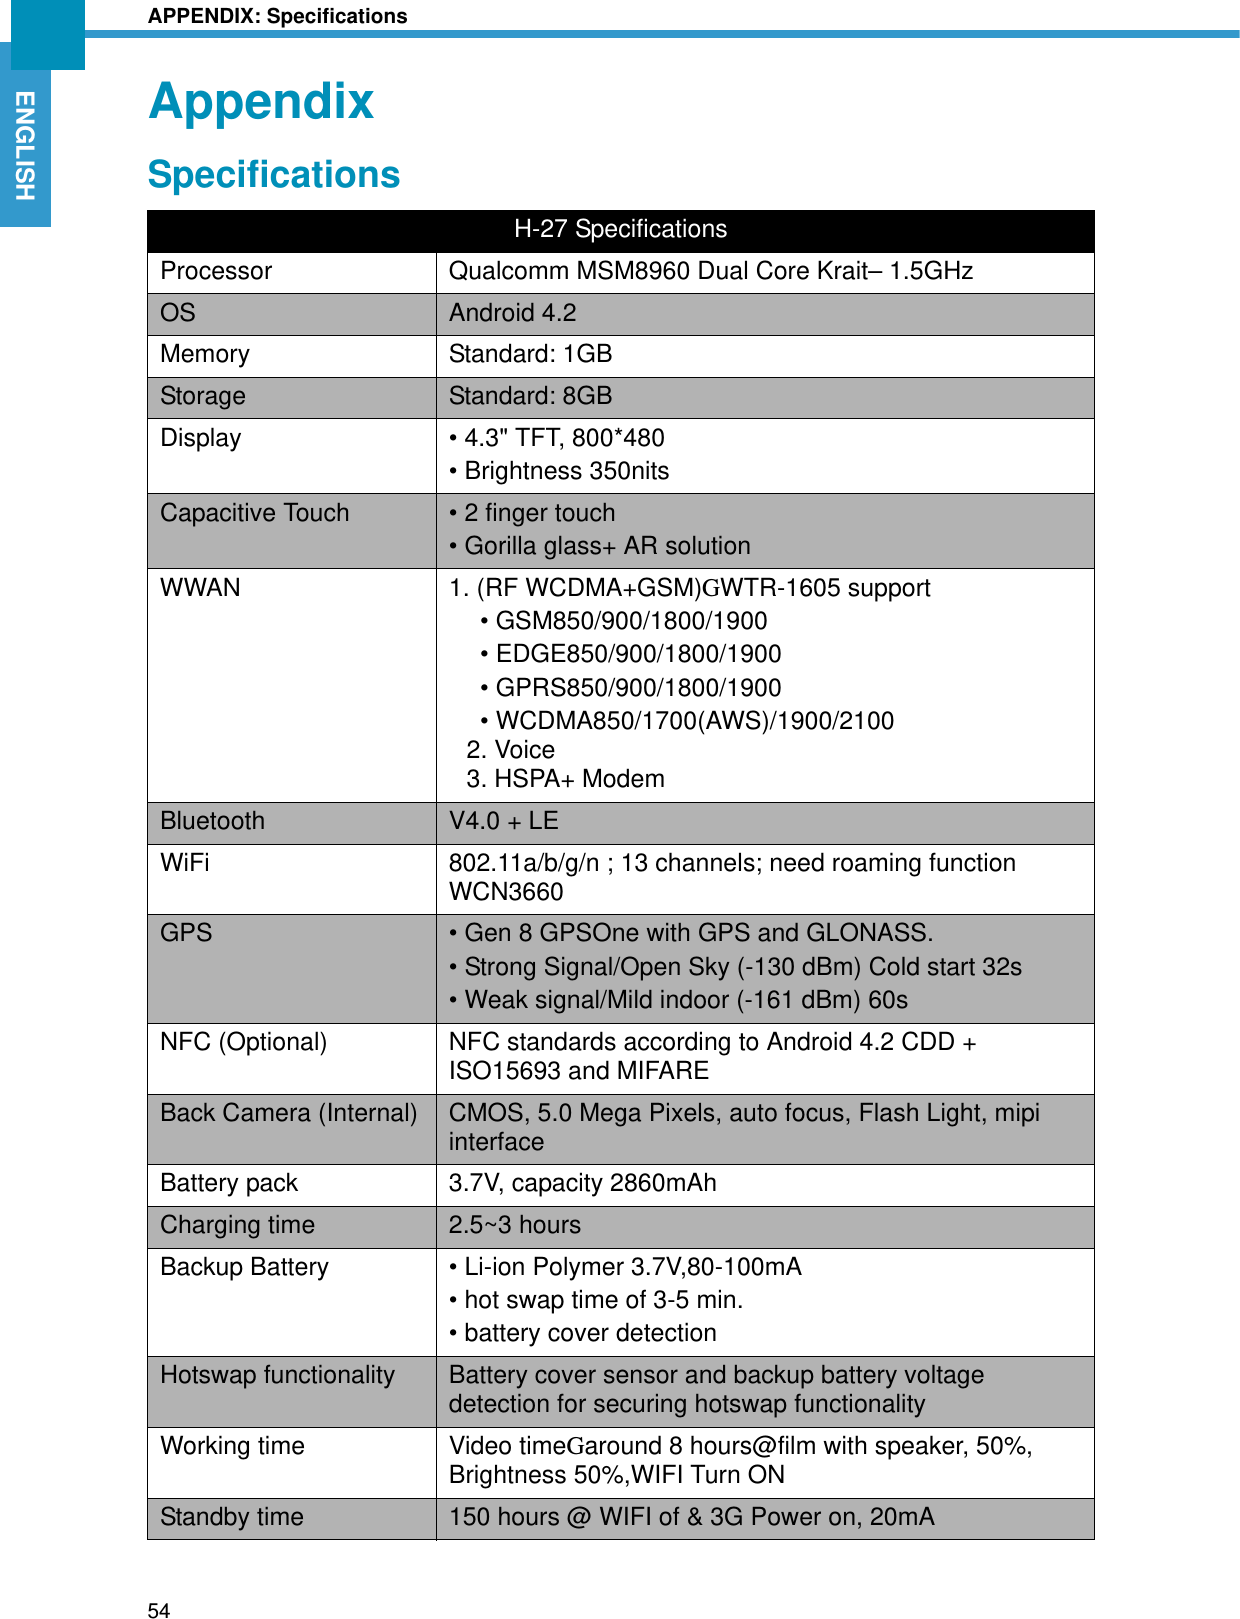 APPENDIX: Specifications54ENGLISHAppendixSpecificationsH-27 SpecificationsProcessor Qualcomm MSM8960 Dual Core Krait– 1.5GHzOS Android 4.2Memory Standard: 1GBStorage Standard: 8GBDisplay • 4.3&quot; TFT, 800*480• Brightness 350nitsCapacitive Touch • 2 finger touch • Gorilla glass+ AR solutionWWAN 1. (RF WCDMA+GSM)GWTR-1605 support• GSM850/900/1800/1900 • EDGE850/900/1800/1900 • GPRS850/900/1800/1900 • WCDMA850/1700(AWS)/1900/2100  2. Voice3. HSPA+ ModemBluetooth V4.0 + LEWiFi 802.11a/b/g/n ; 13 channels; need roaming function WCN3660GPS  • Gen 8 GPSOne with GPS and GLONASS.• Strong Signal/Open Sky (-130 dBm) Cold start 32s• Weak signal/Mild indoor (-161 dBm) 60s NFC (Optional) NFC standards according to Android 4.2 CDD + ISO15693 and MIFAREBack Camera (Internal) CMOS, 5.0 Mega Pixels, auto focus, Flash Light, mipi interfaceBattery pack 3.7V, capacity 2860mAhCharging time  2.5~3 hoursBackup Battery • Li-ion Polymer 3.7V,80-100mA• hot swap time of 3-5 min.• battery cover detectionHotswap functionality Battery cover sensor and backup battery voltage detection for securing hotswap functionalityWorking time Video timeGaround 8 hours@film with speaker, 50%, Brightness 50%,WIFI Turn ON Standby time 150 hours @ WIFI of &amp; 3G Power on, 20mA